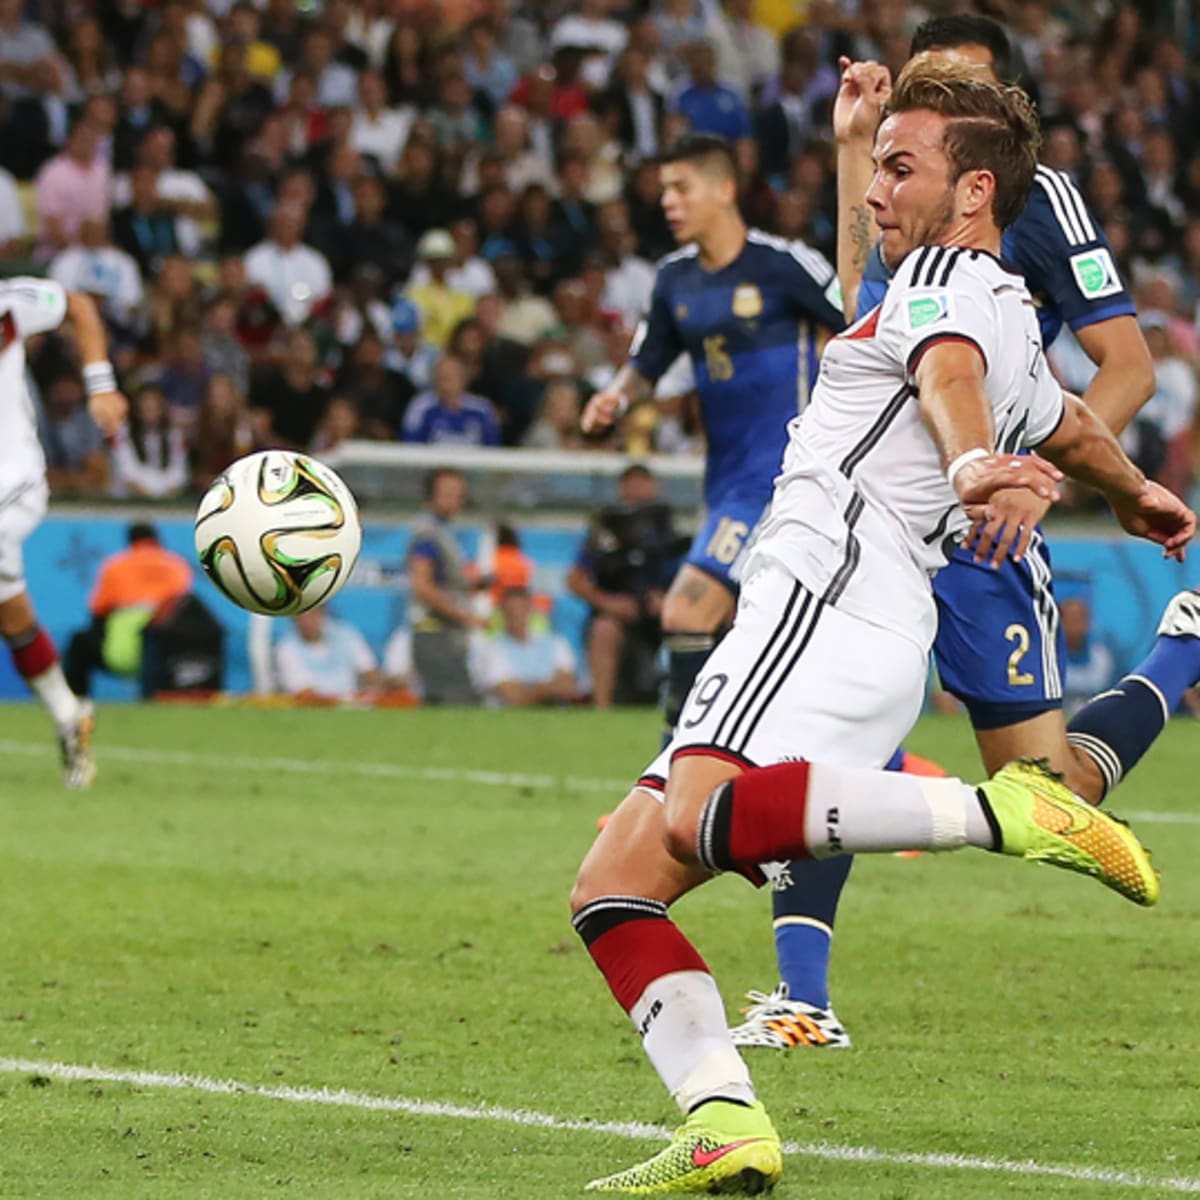 2014 World Cup final: Germany beats Argentina for fourth title